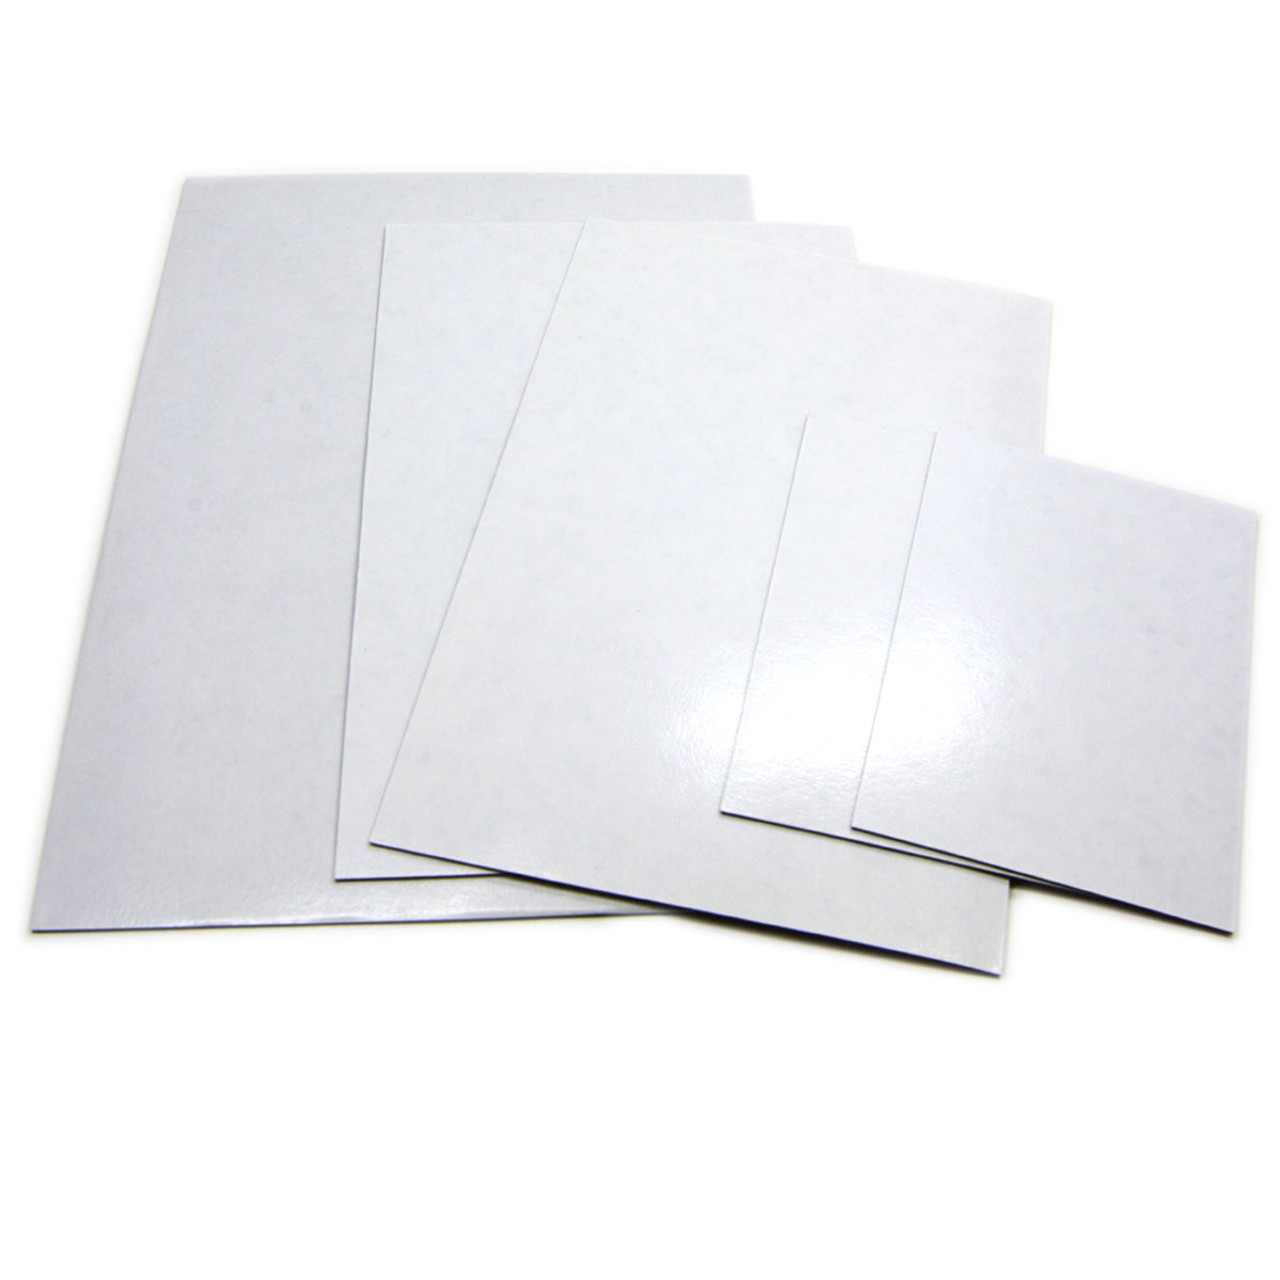 Magnetic Sheets A Pack of 5 with Adhesive Magnetic Photo Sheets